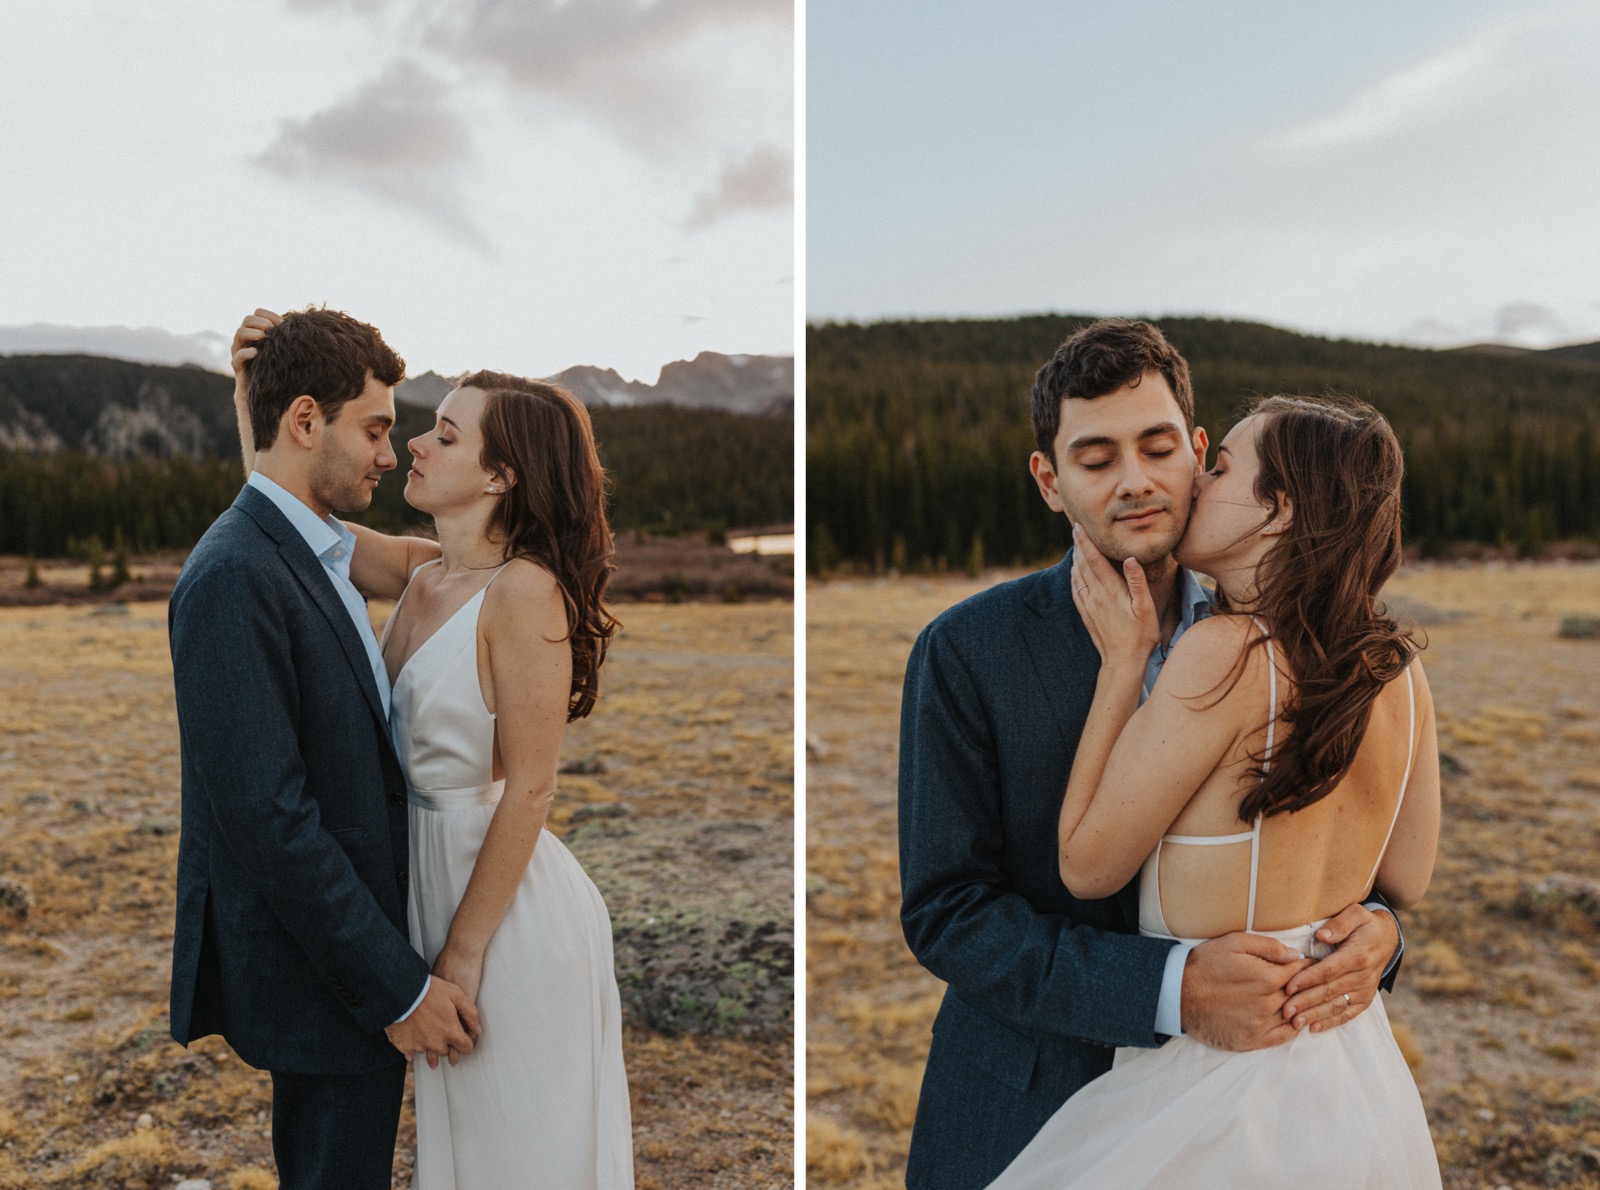 Candid portraits of an emotional bride holding her groom's face and kissing his cheek during their elopement in Colorado.